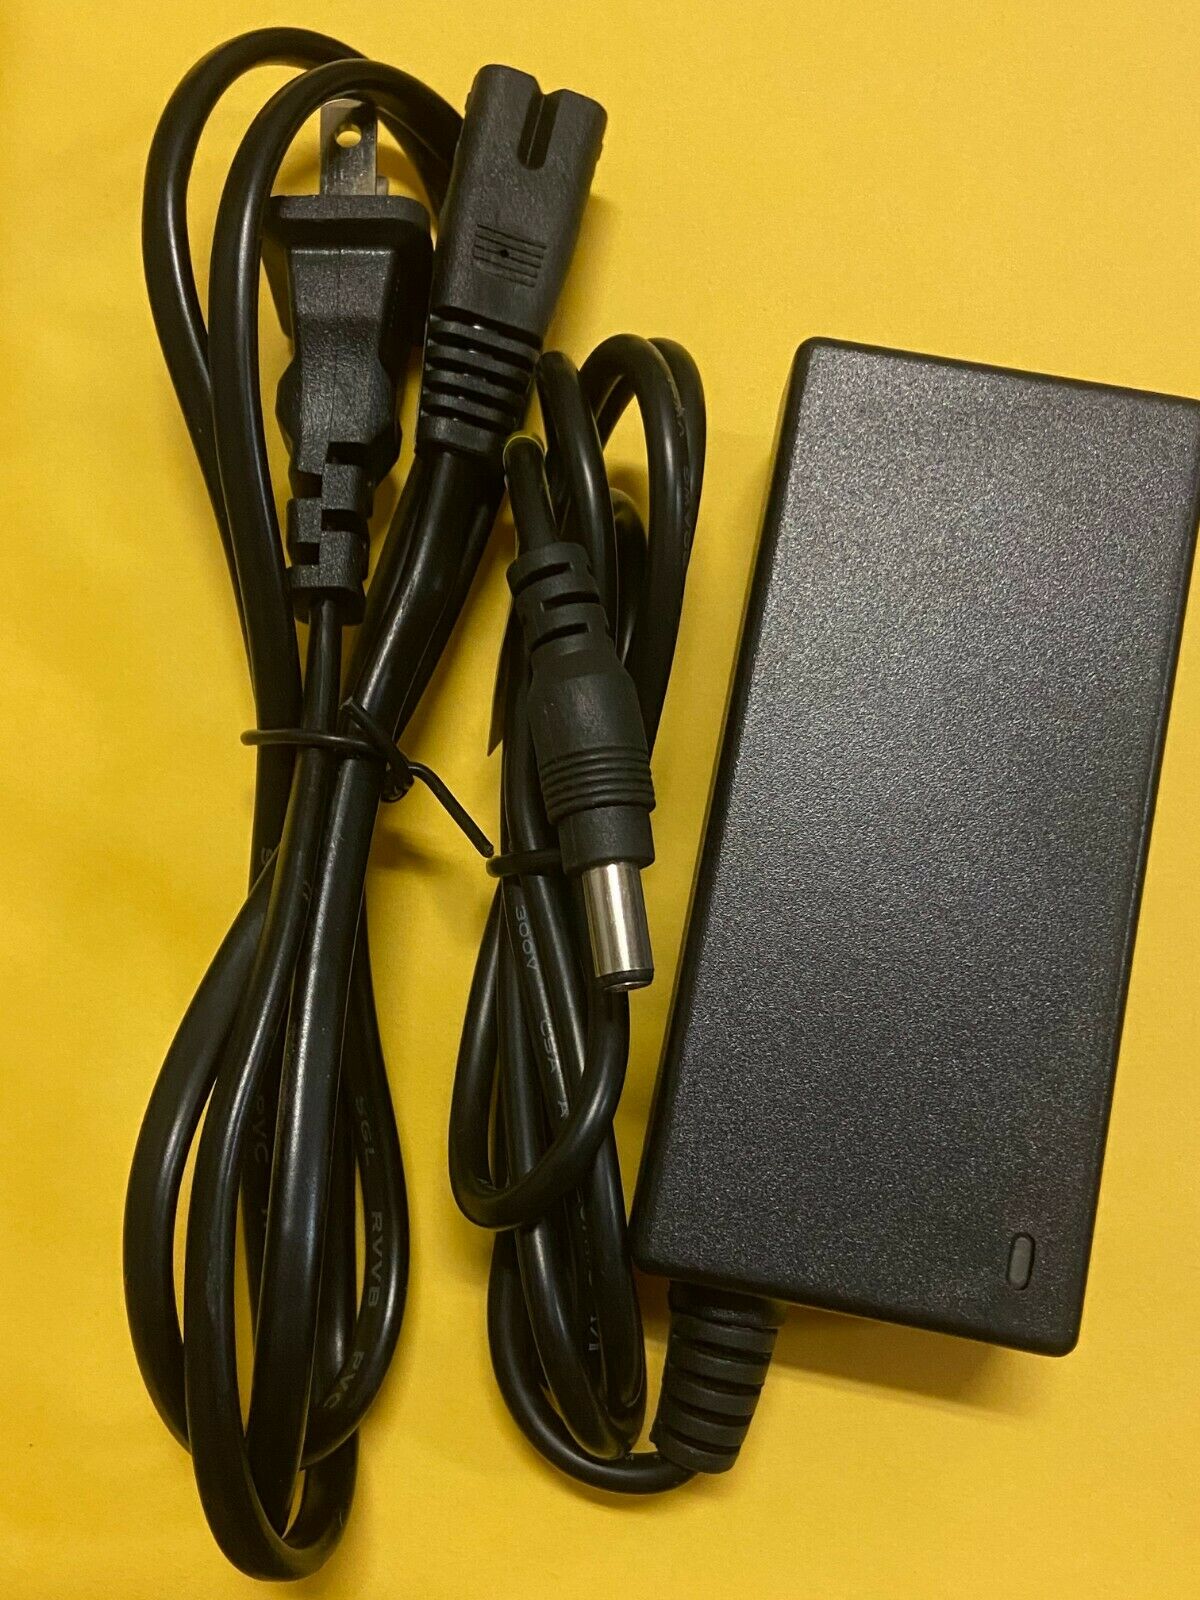 Genuine Power Supply AC DC Adapter For Qnap TS-251 /251+ / TS-25X / TS-253 Pro Color: Black Type: - Click Image to Close